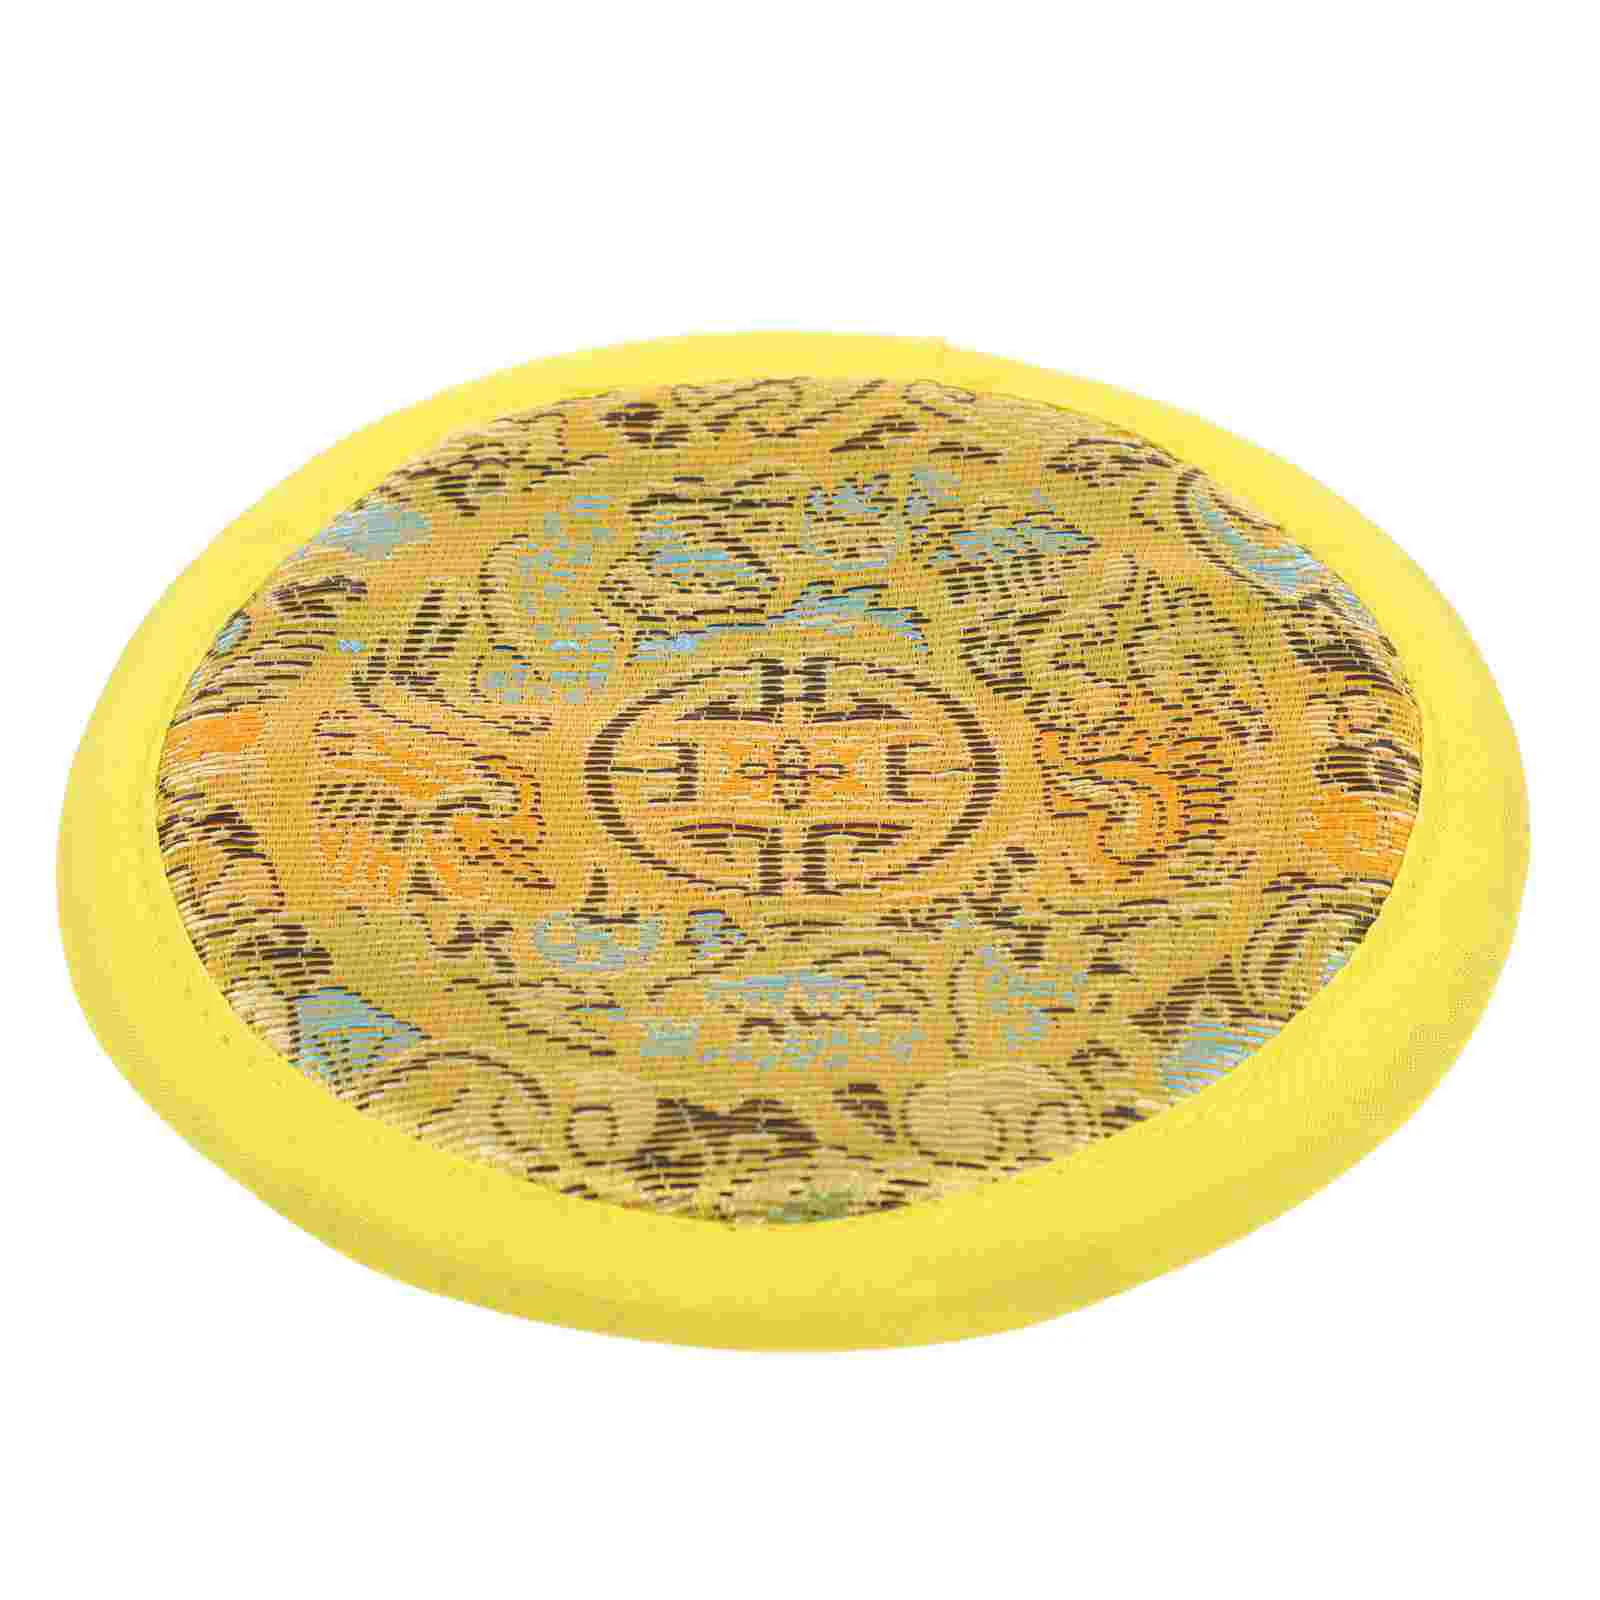 

Bowl Singing Sound Mat Tibetan Cushion Pad Pillow Meditation Cusion Embroidered Supplies Embroidery Religious Accessories